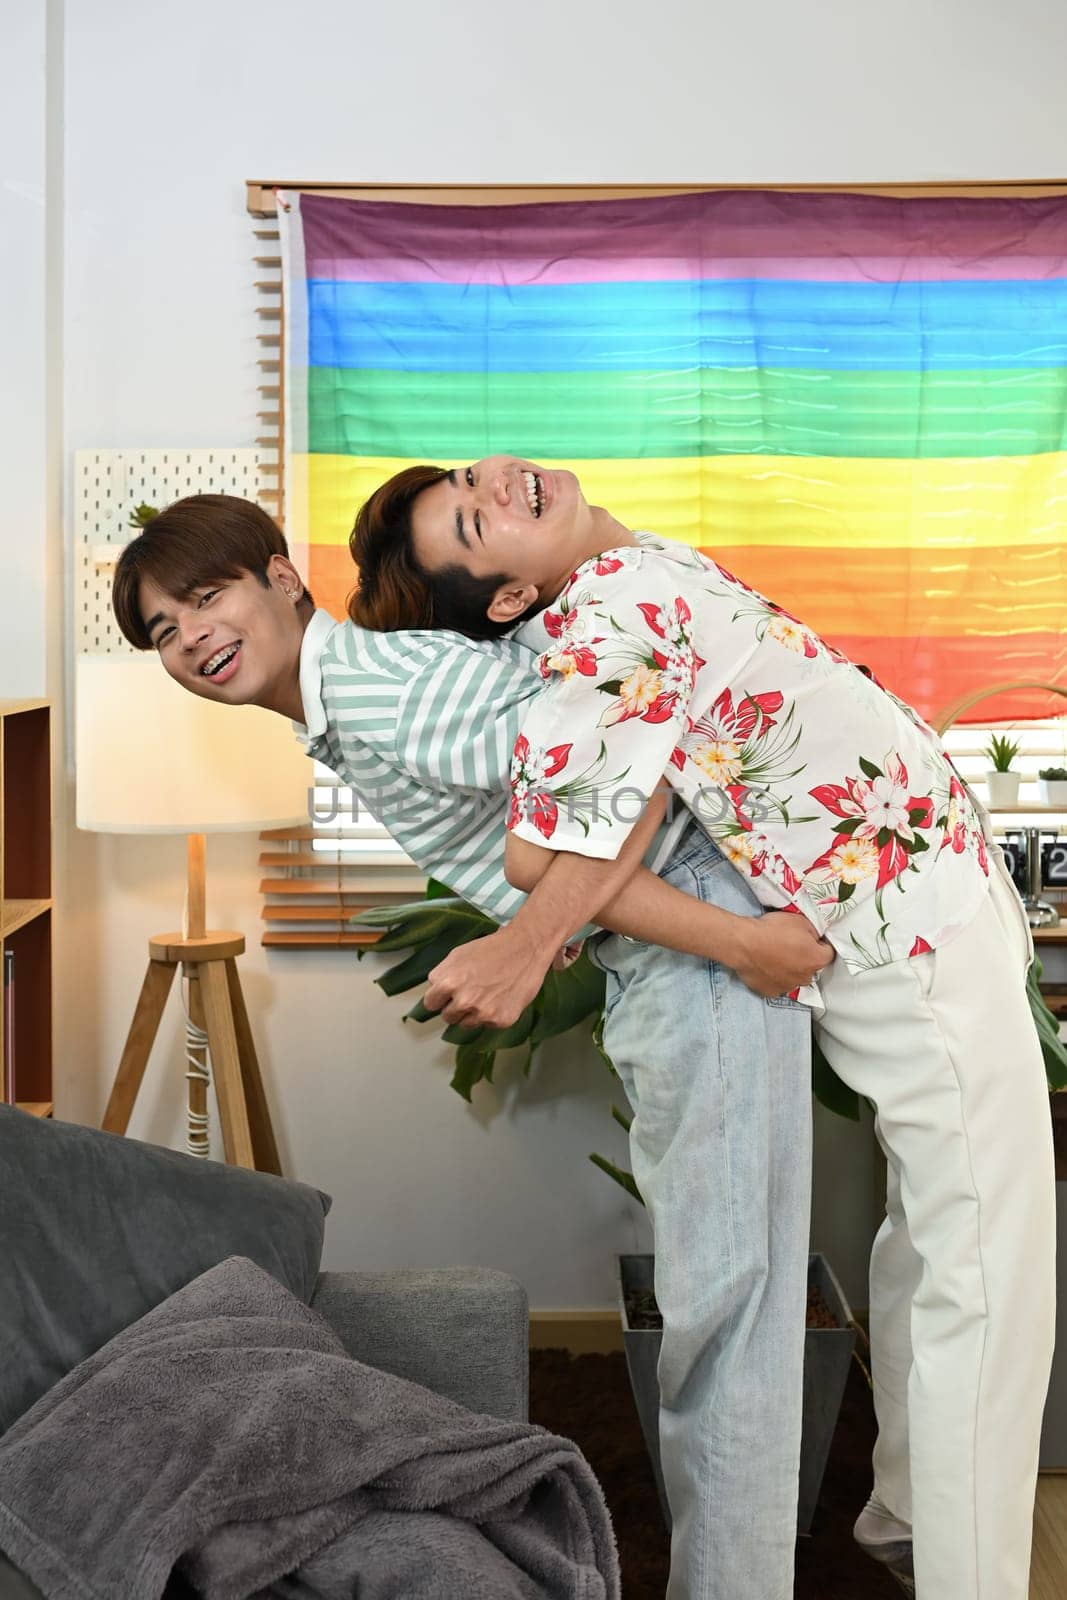 Cheerful gay male couple giving piggyback ride for each other laugh joyfully in living room.